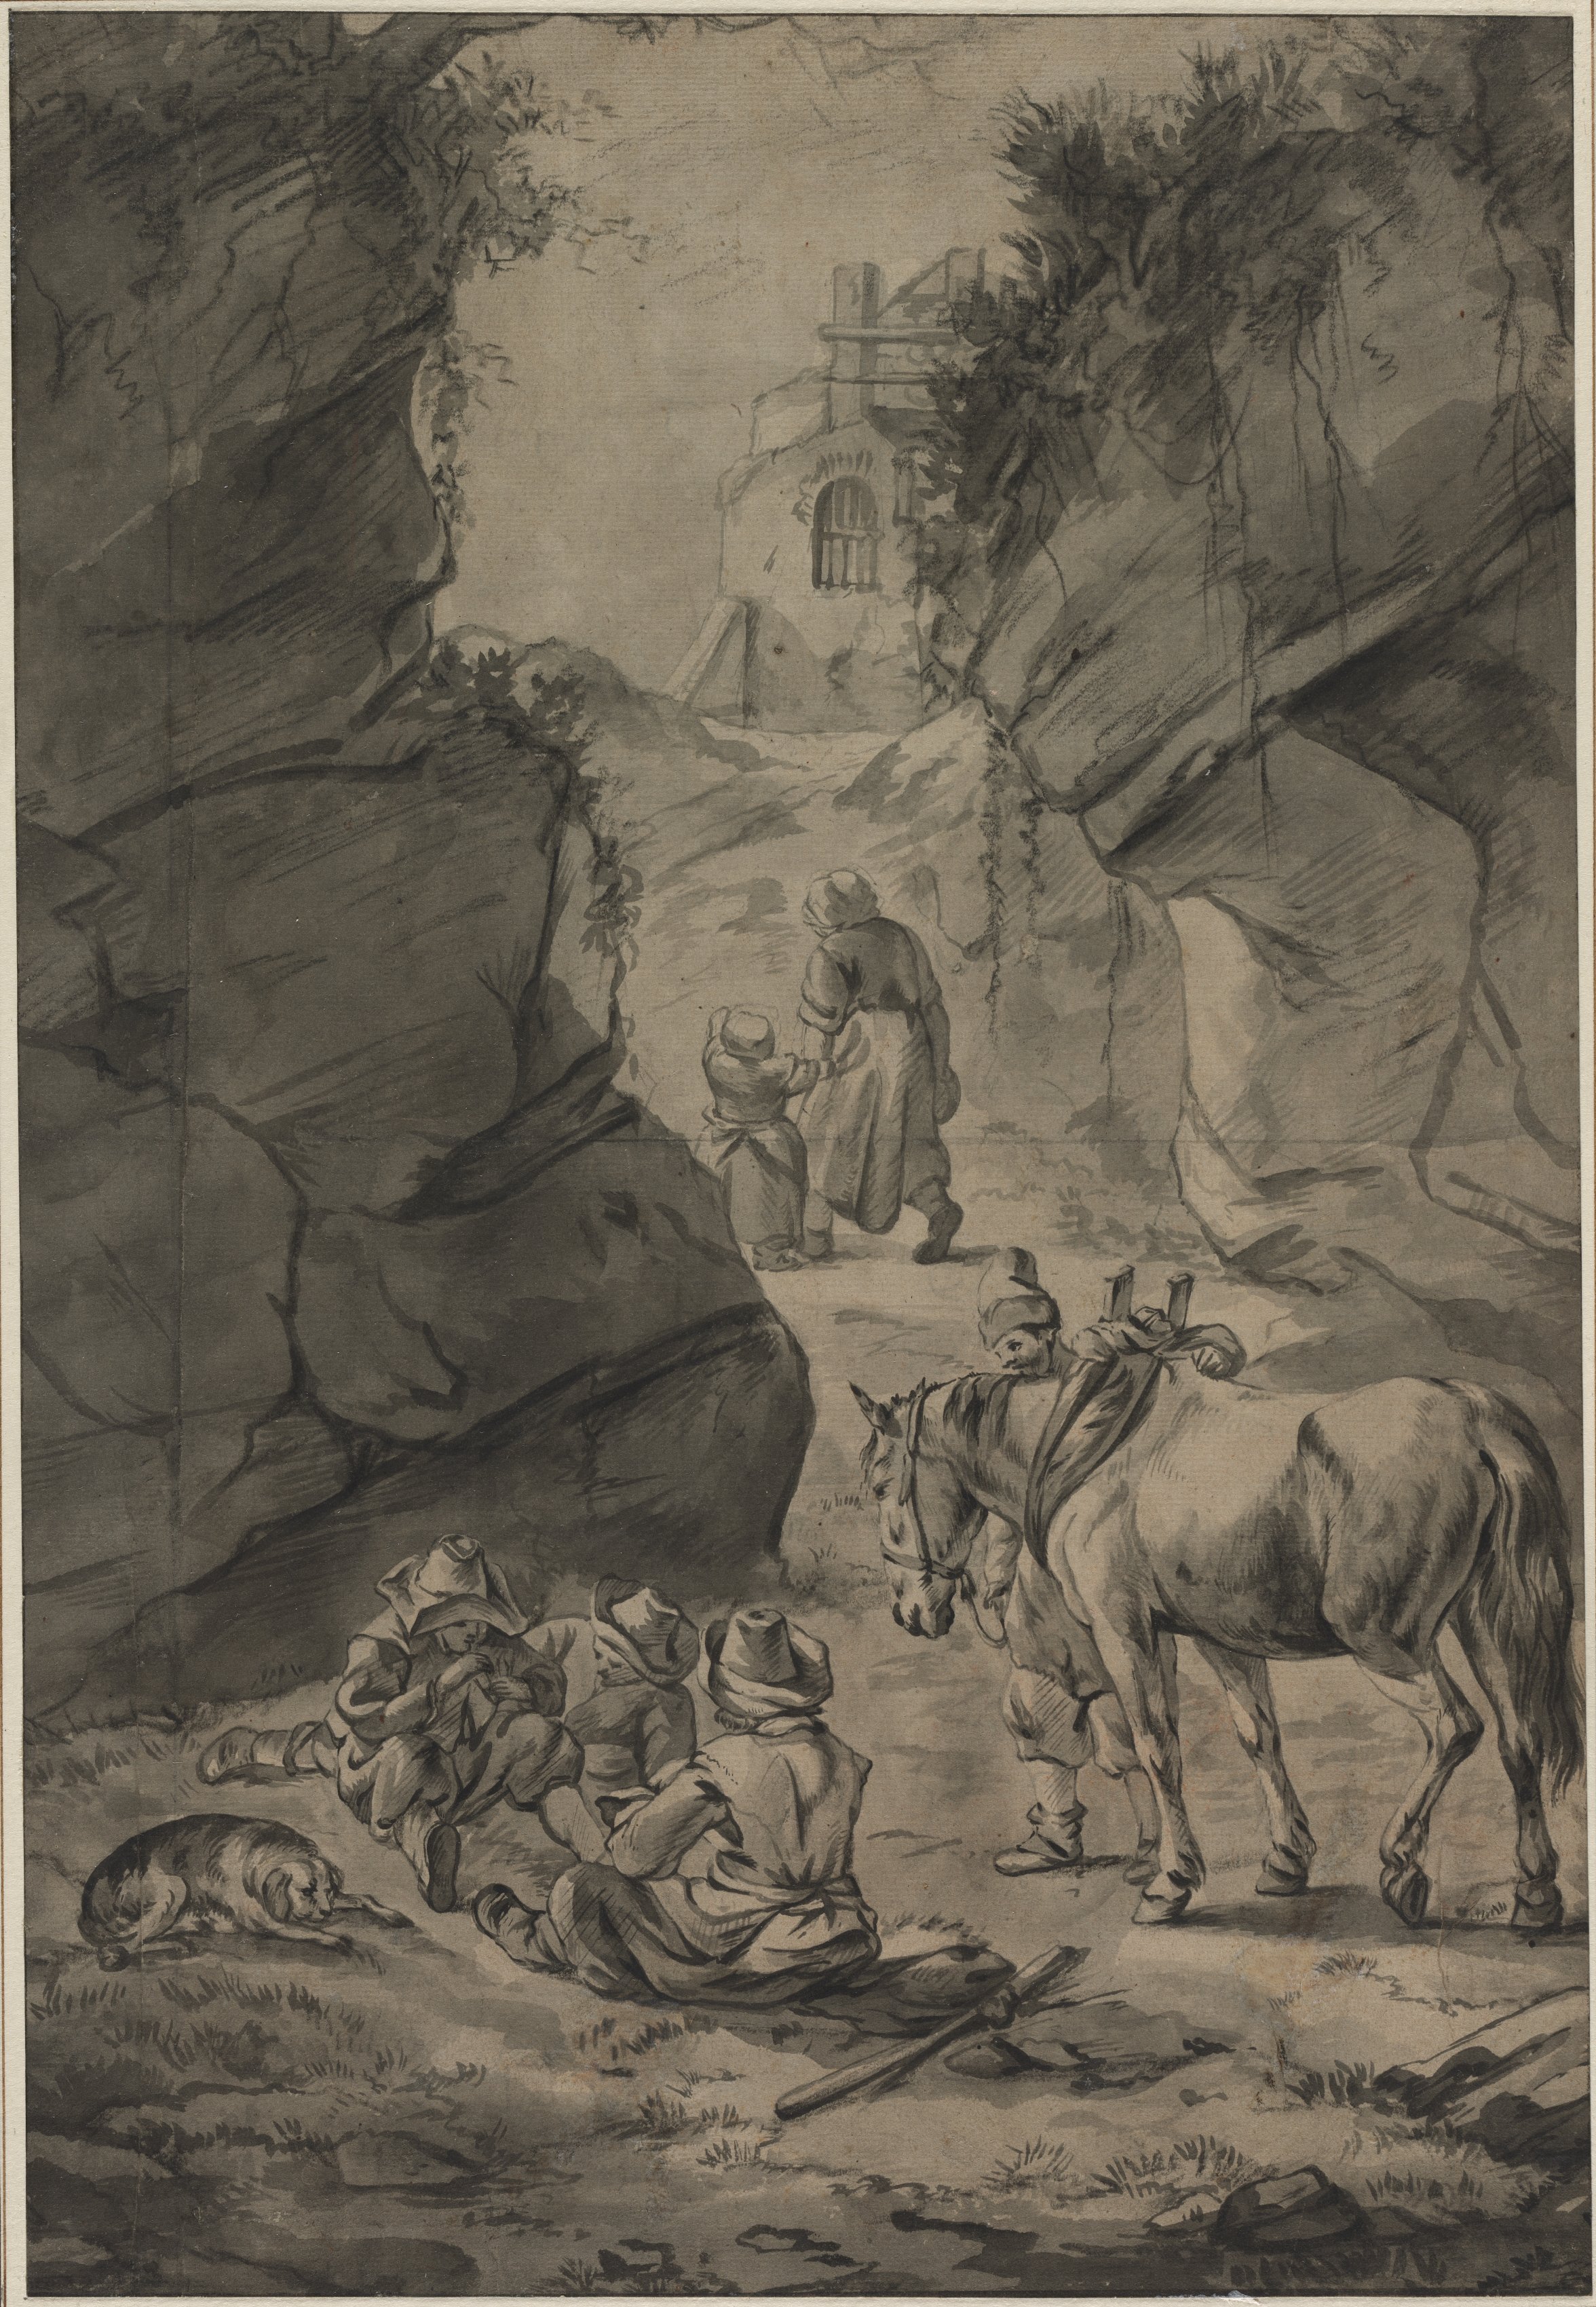 Peasants in a Rocky Landscape